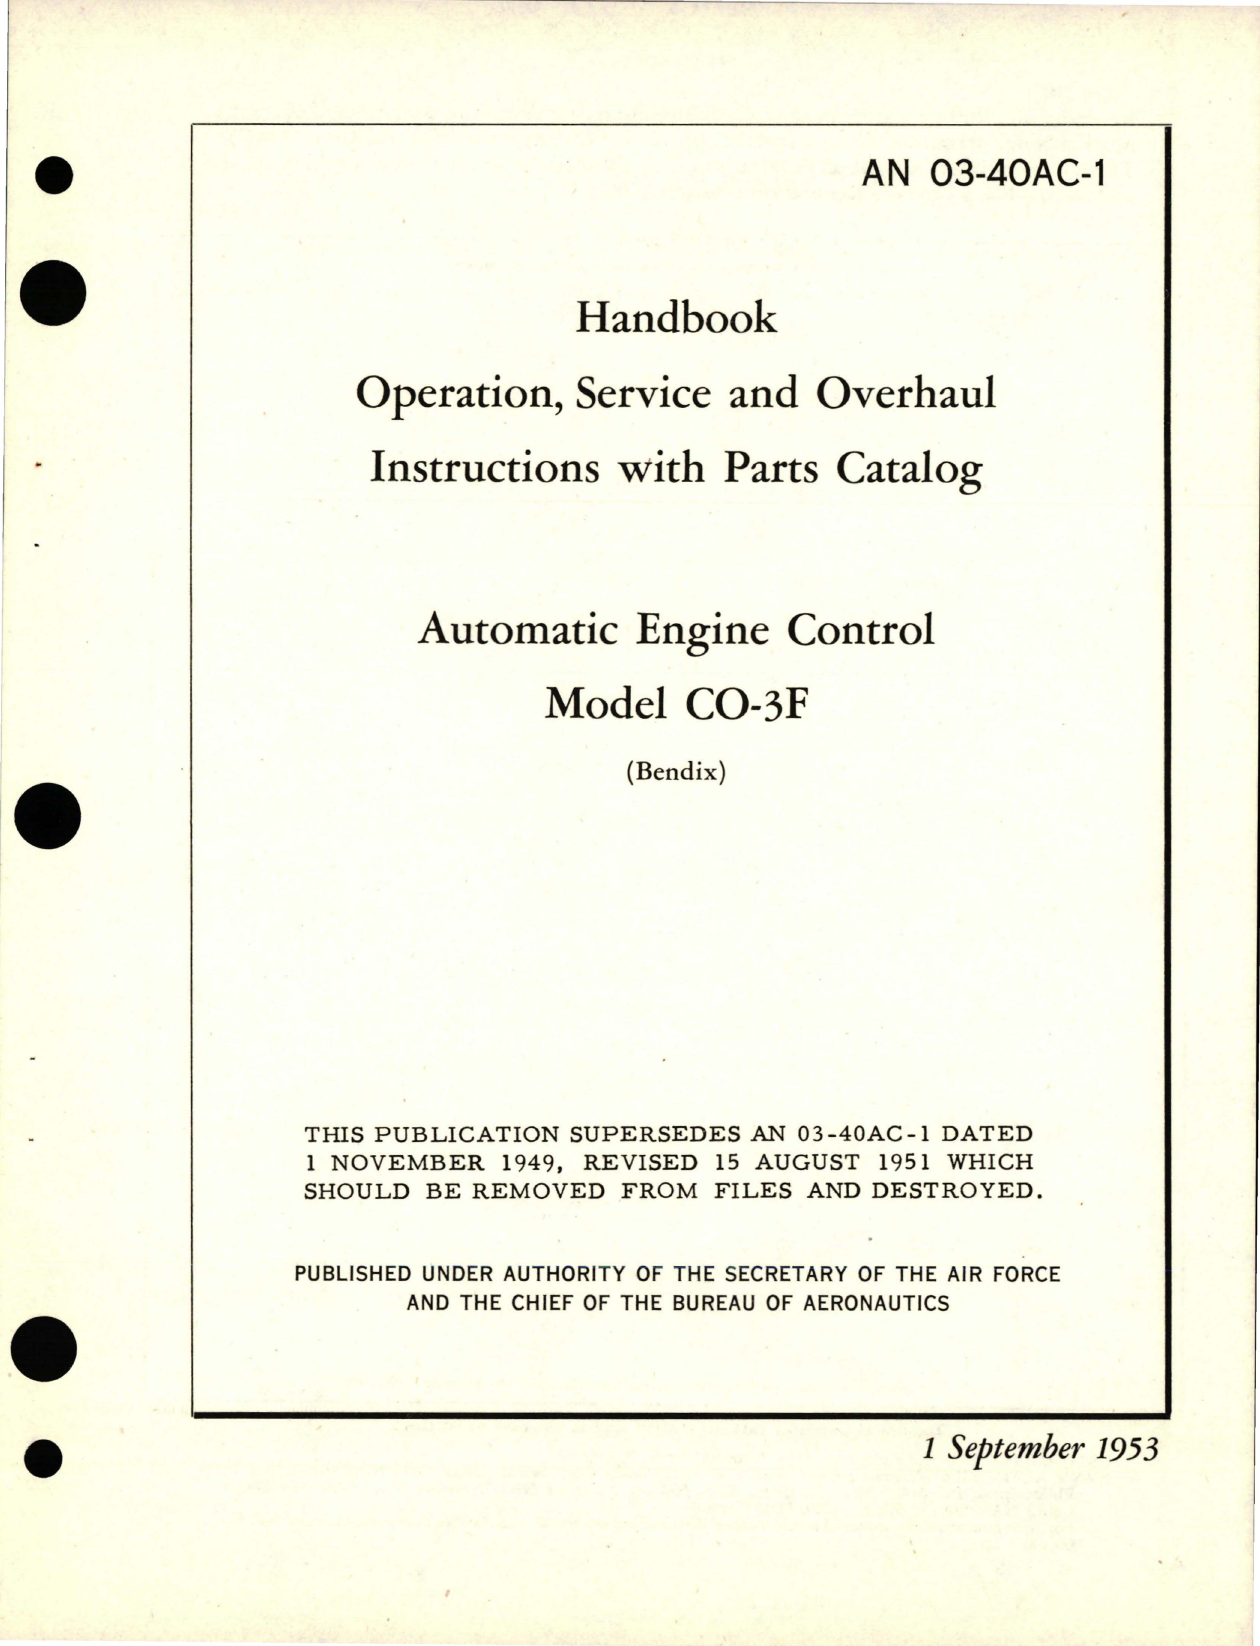 Sample page 1 from AirCorps Library document: Operation, Service and Overhaul Instructions with Parts Catalog for Automatic Engine Control - Model CO-3F